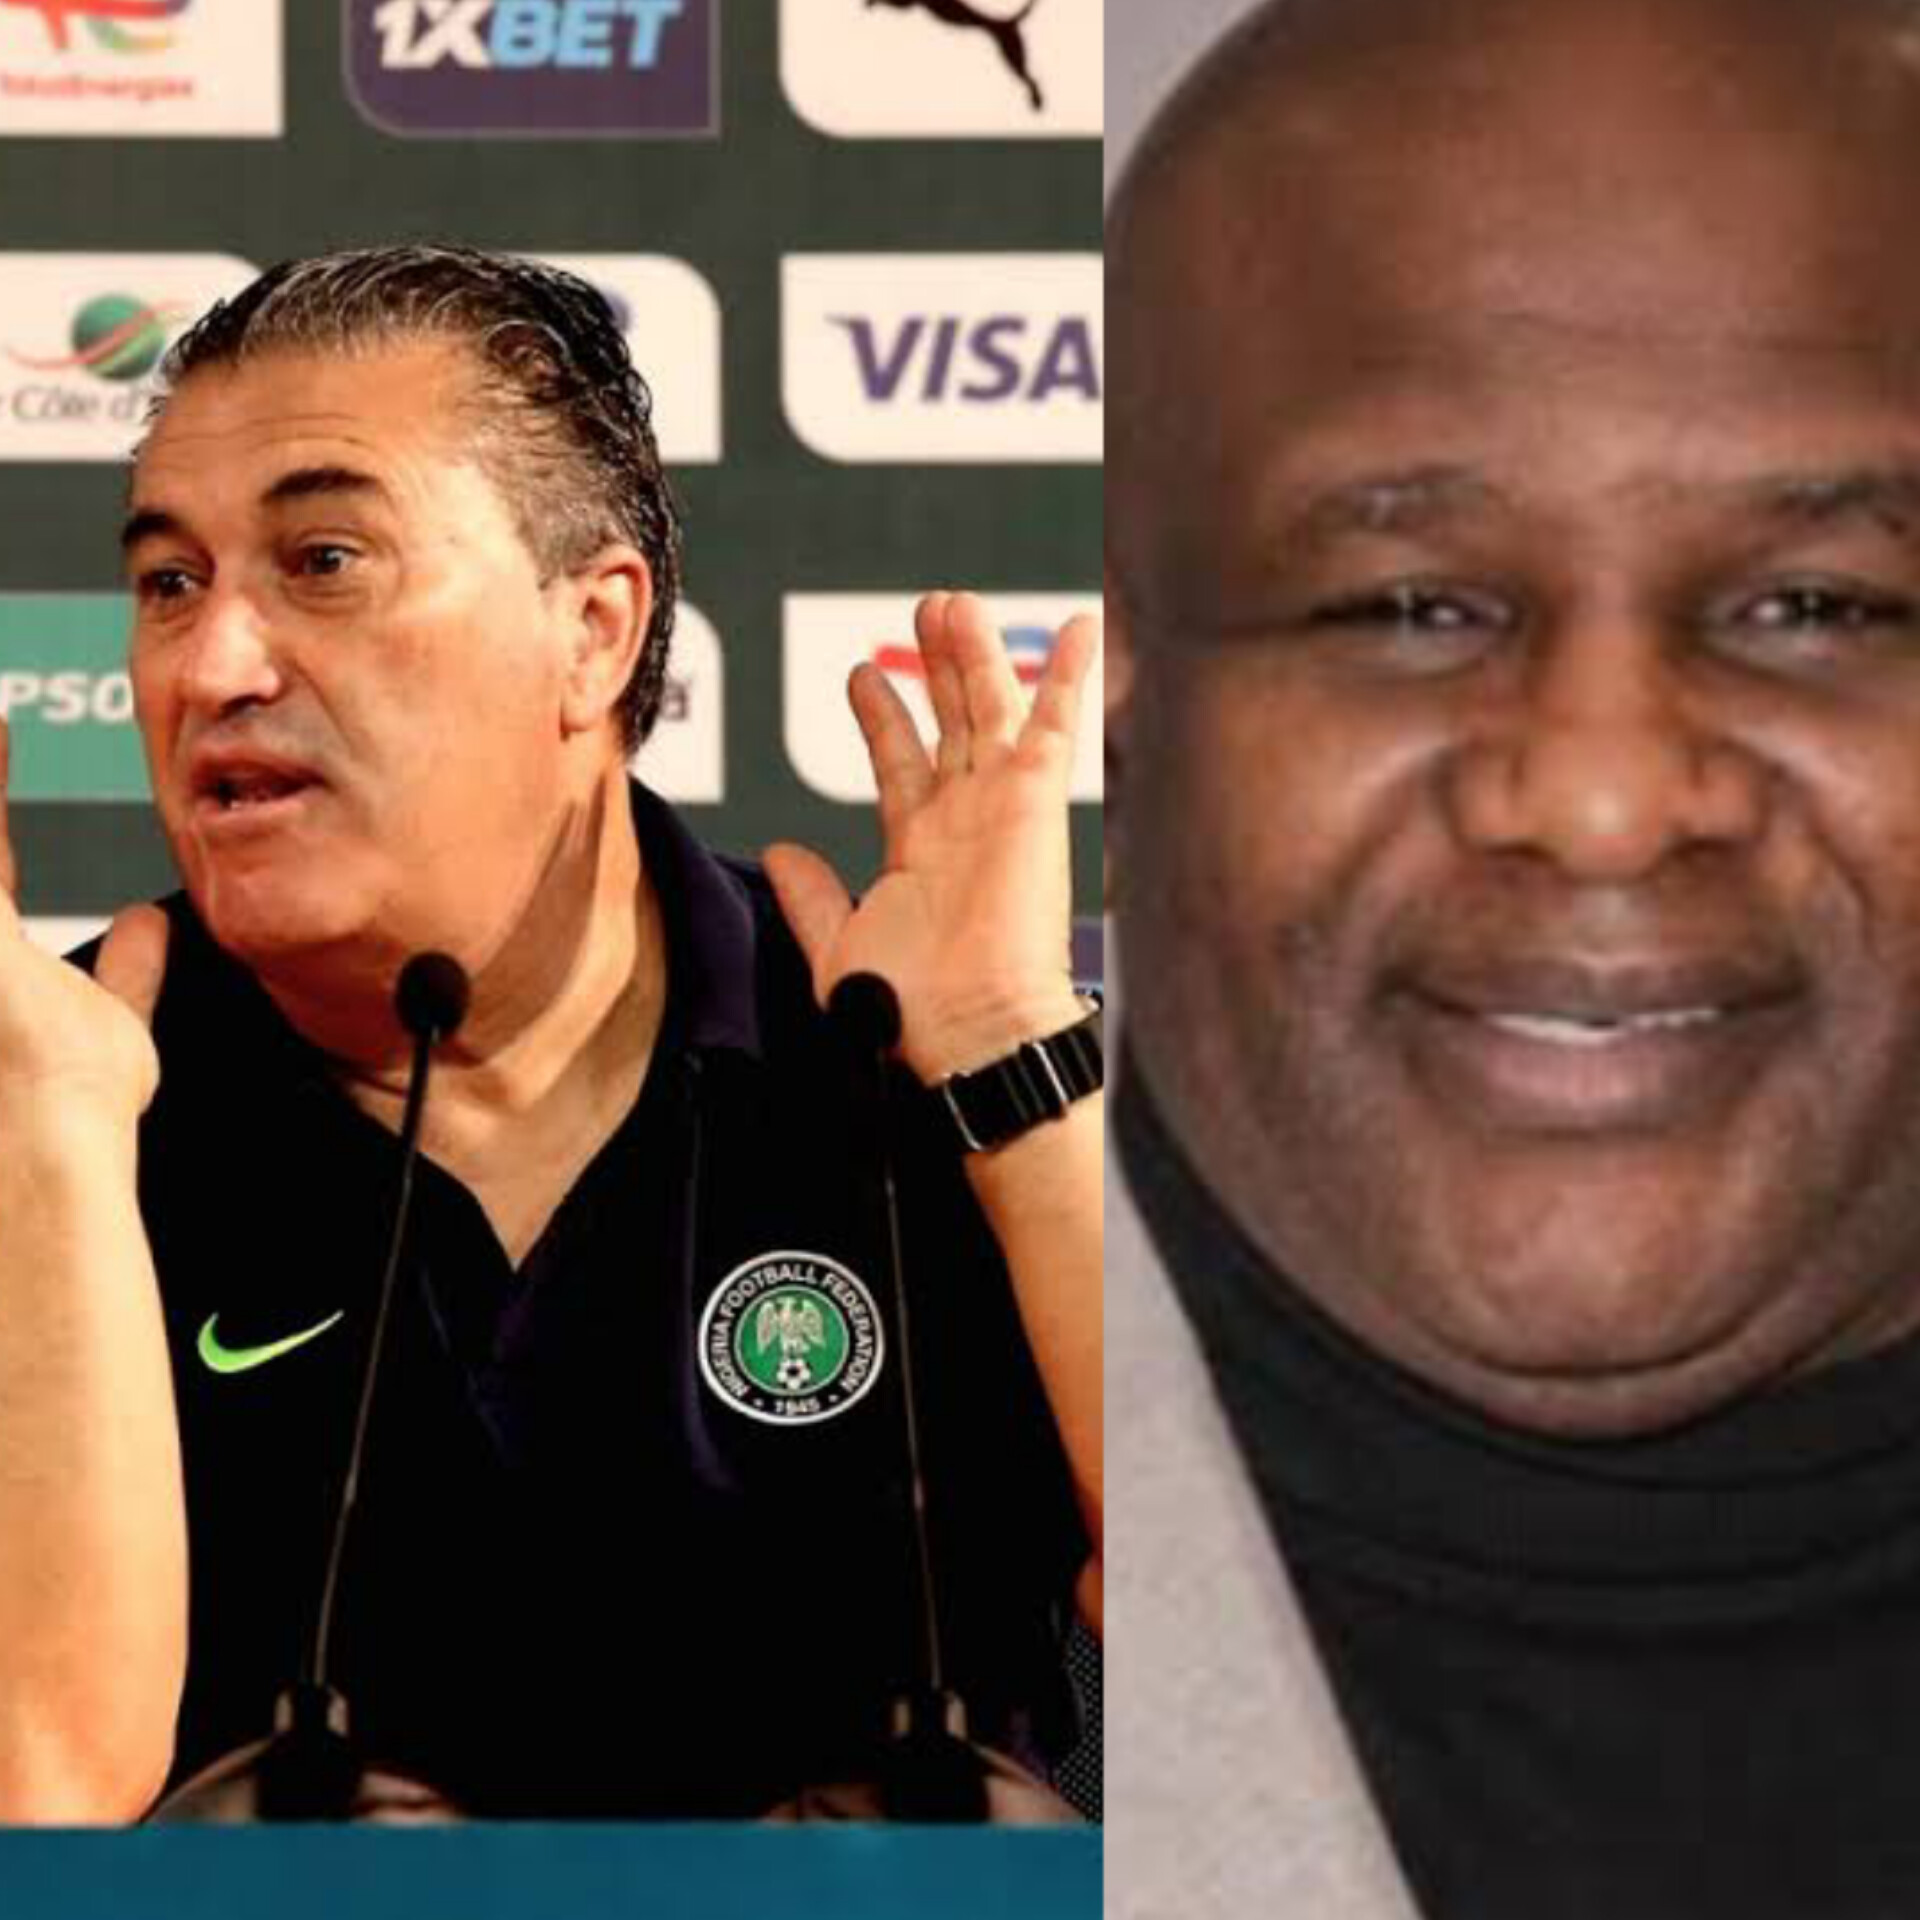 AFCON 2023: Jose Peseiro should be fired - Former Super Eagles player Peterside Idah